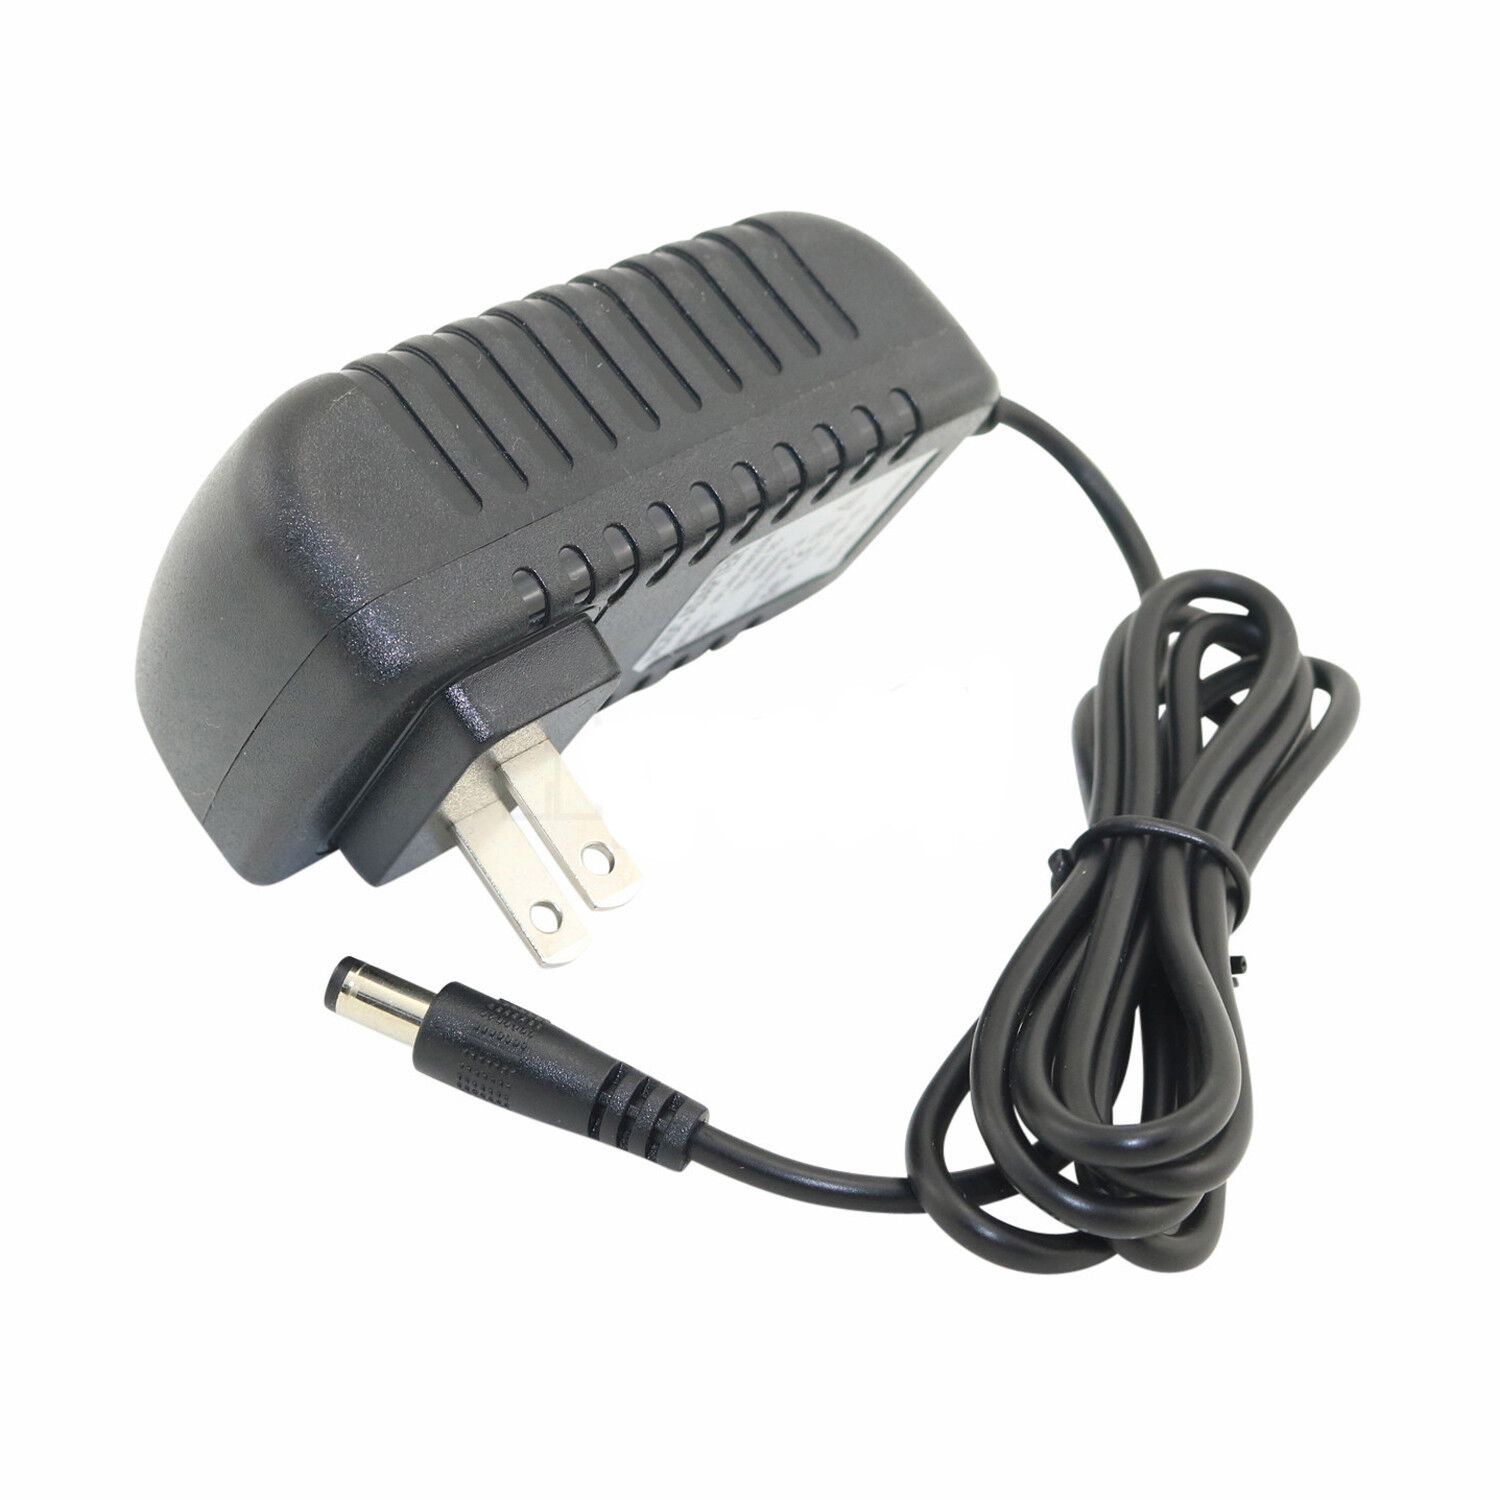 *Brand NEW*Laptop Charger Getac B300 B300X Fully Rugged AC Adapter Power Supply Cord